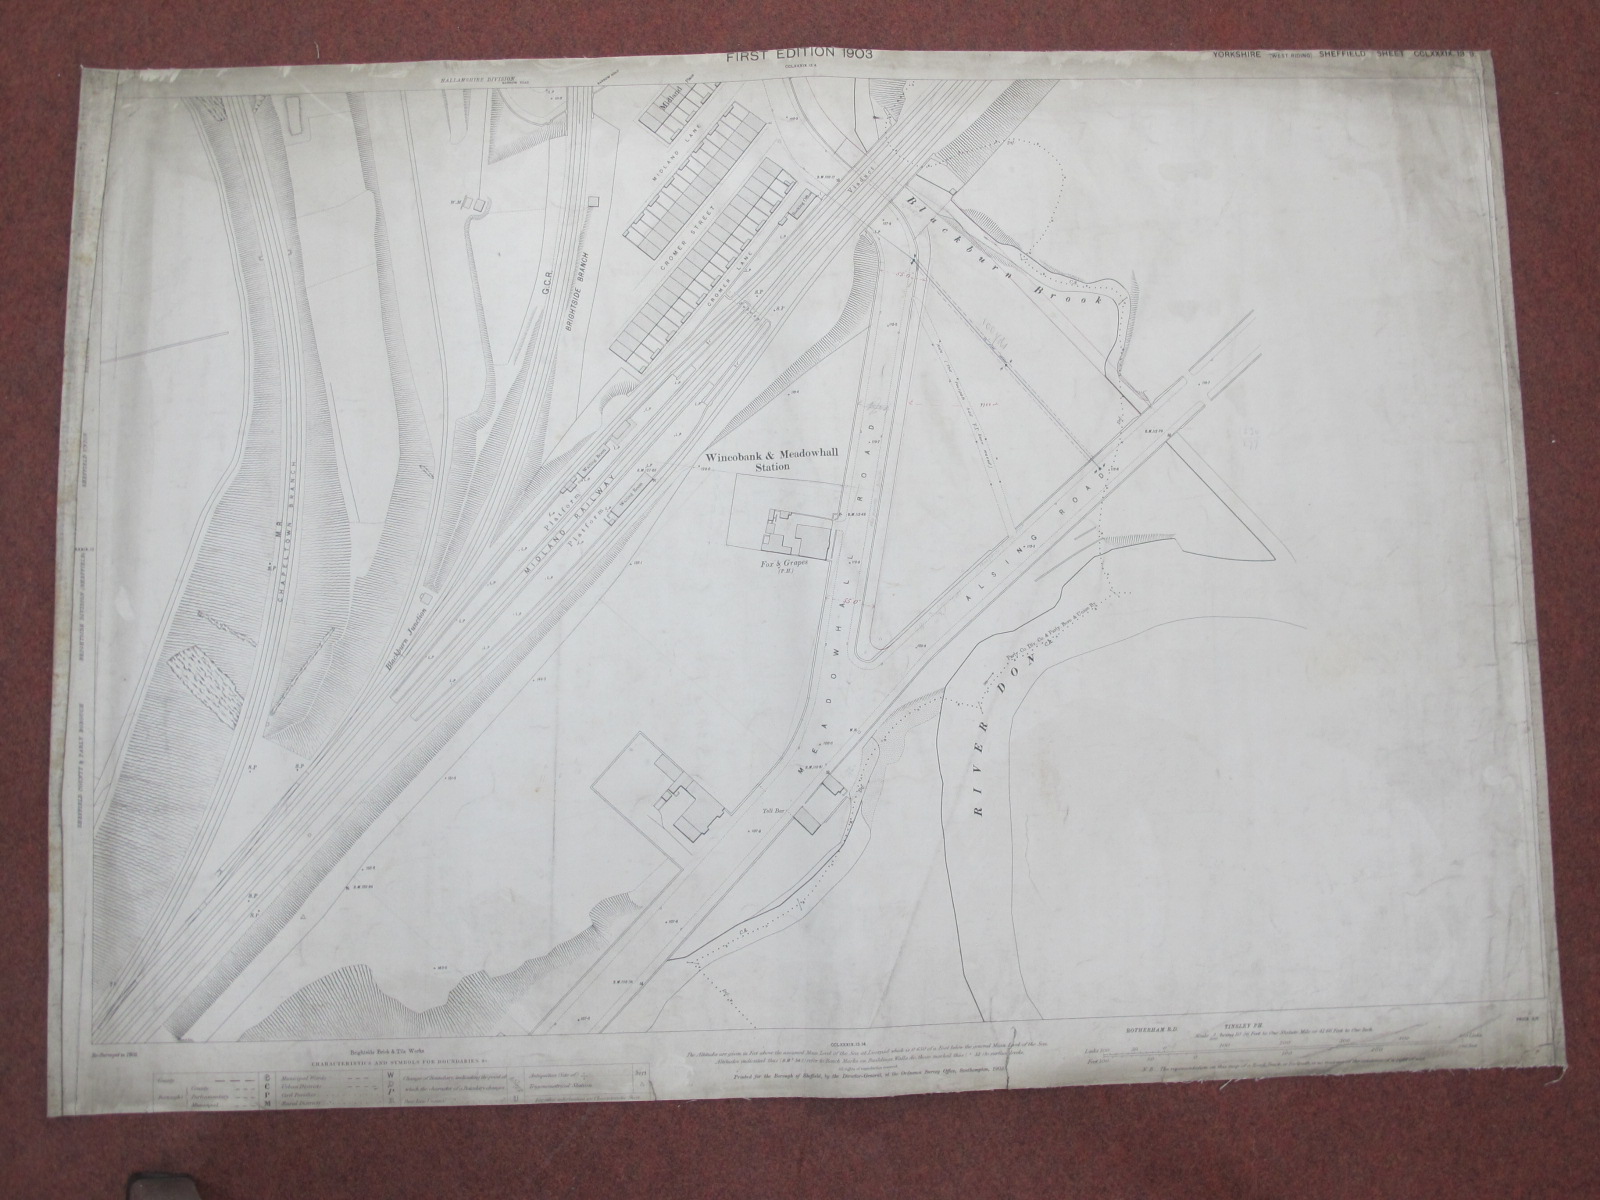 West Riding Yorkshire Maps, Rotherham and area, some dates noted - 1889, 1903, 1959, 1960, various - Image 10 of 10